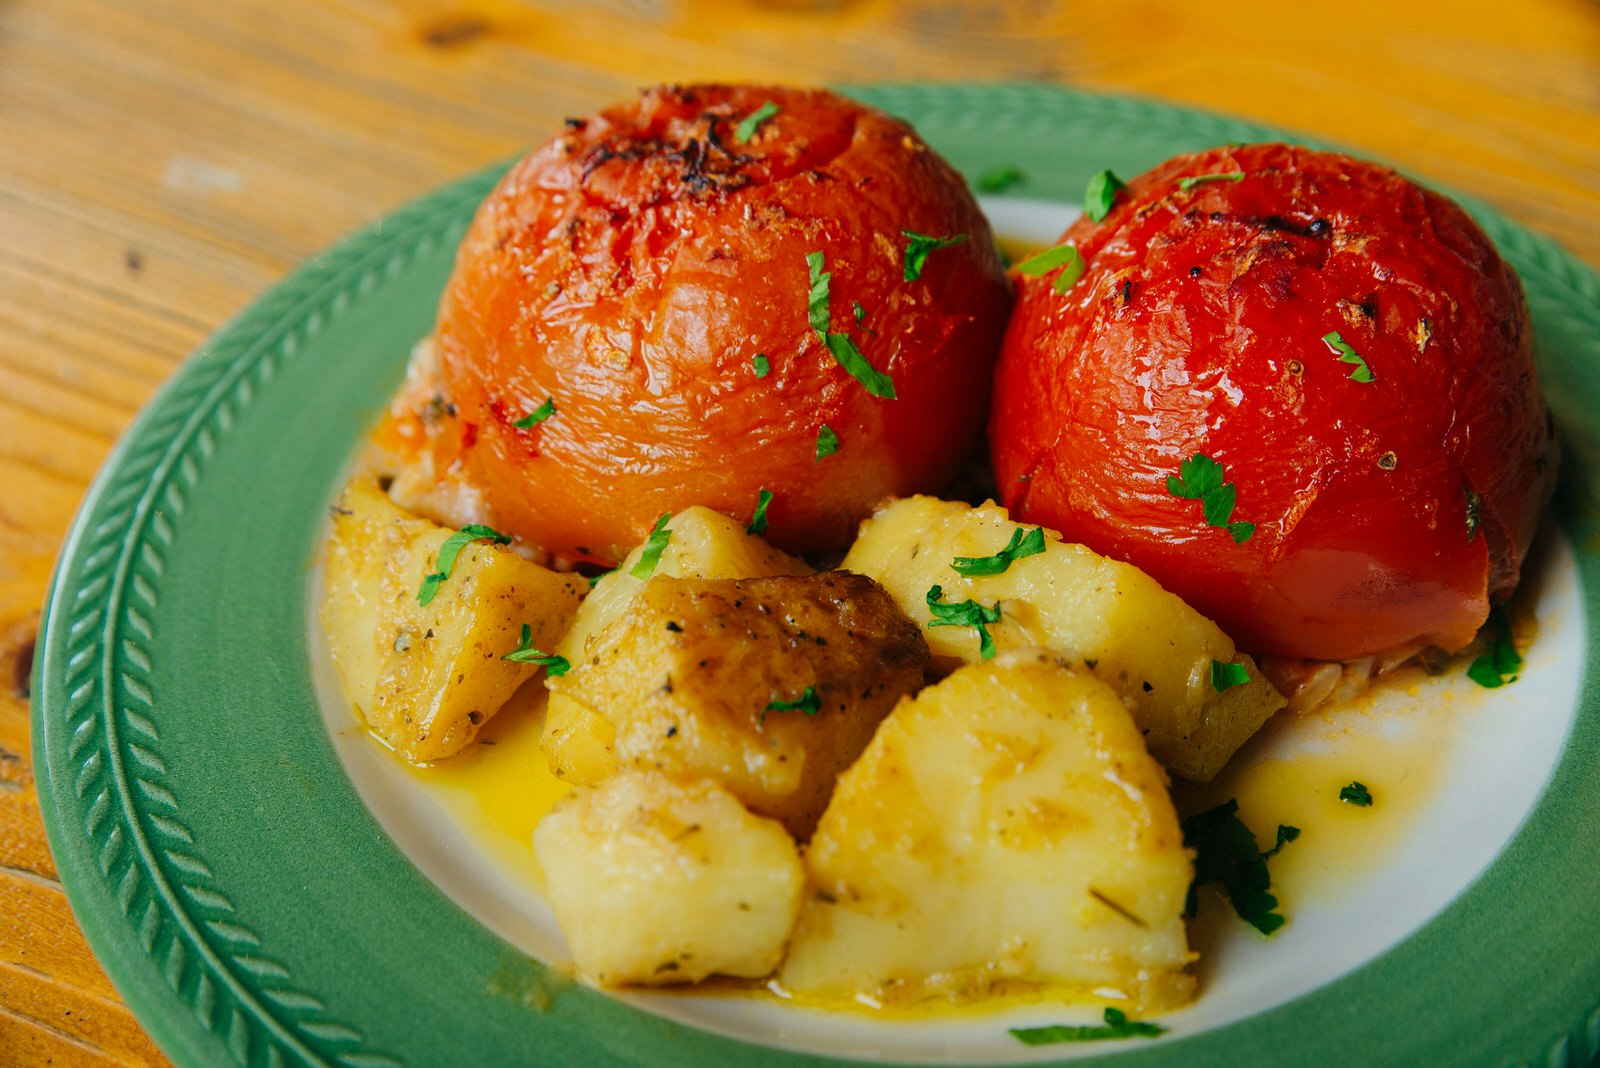 Yemista, stuffed tomatoes with potatoes served on a patterned, blue ceramic plate